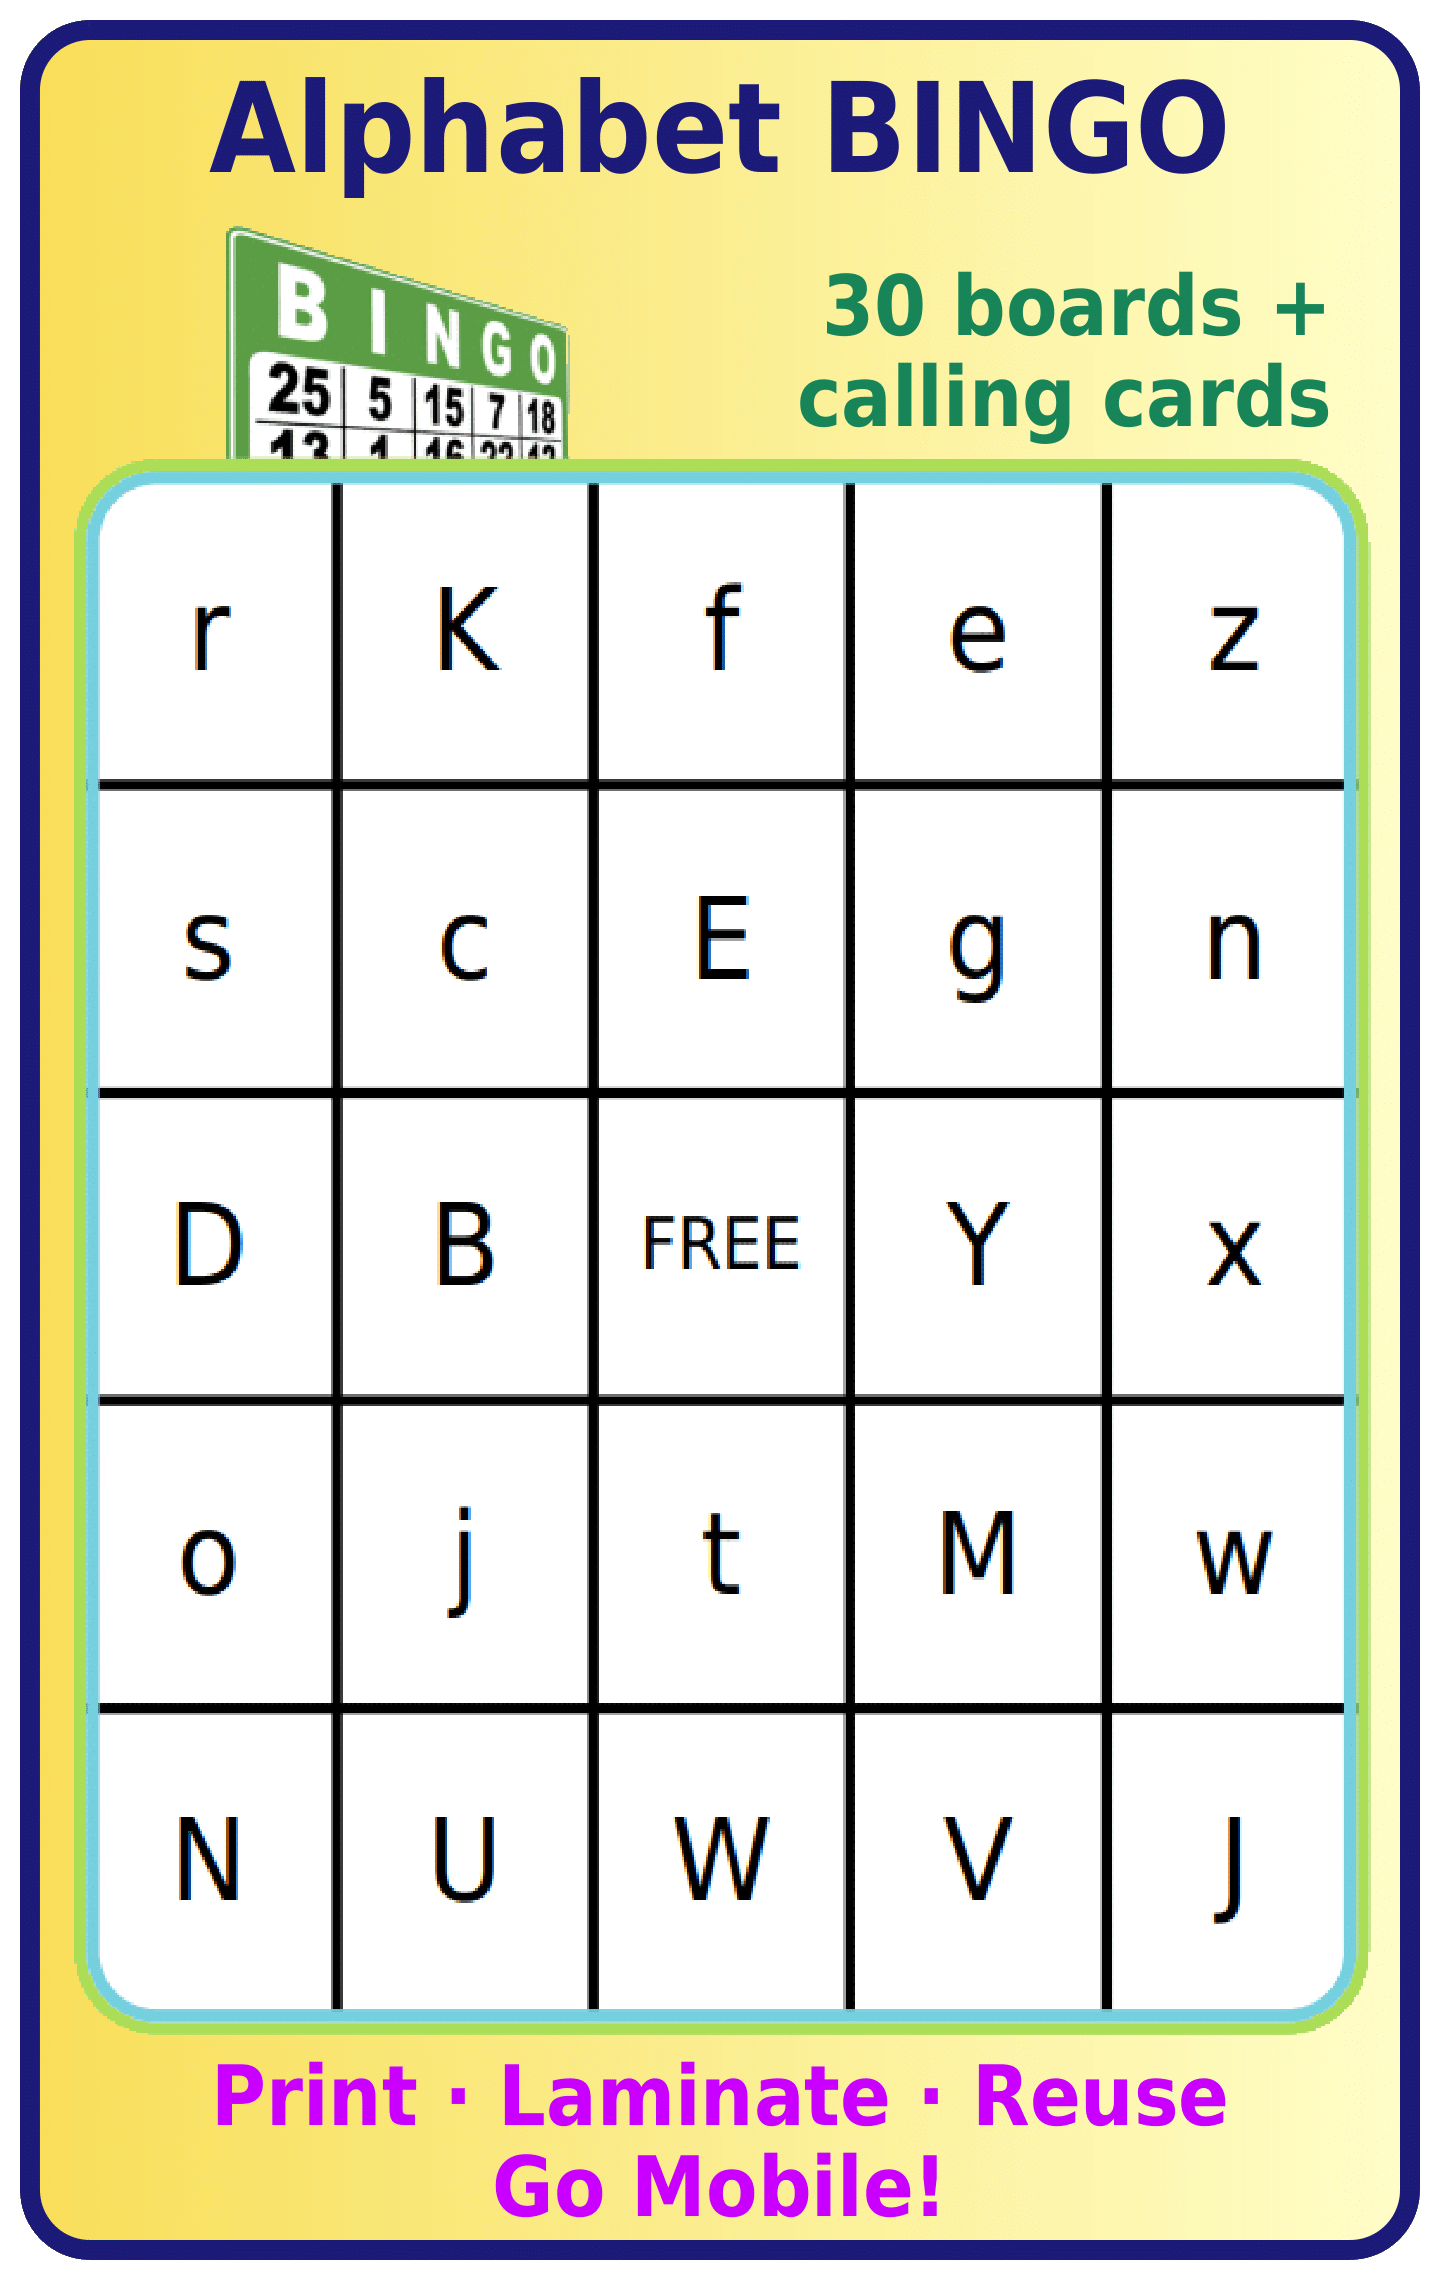 Bingo board with a mix of upper and lower case letters